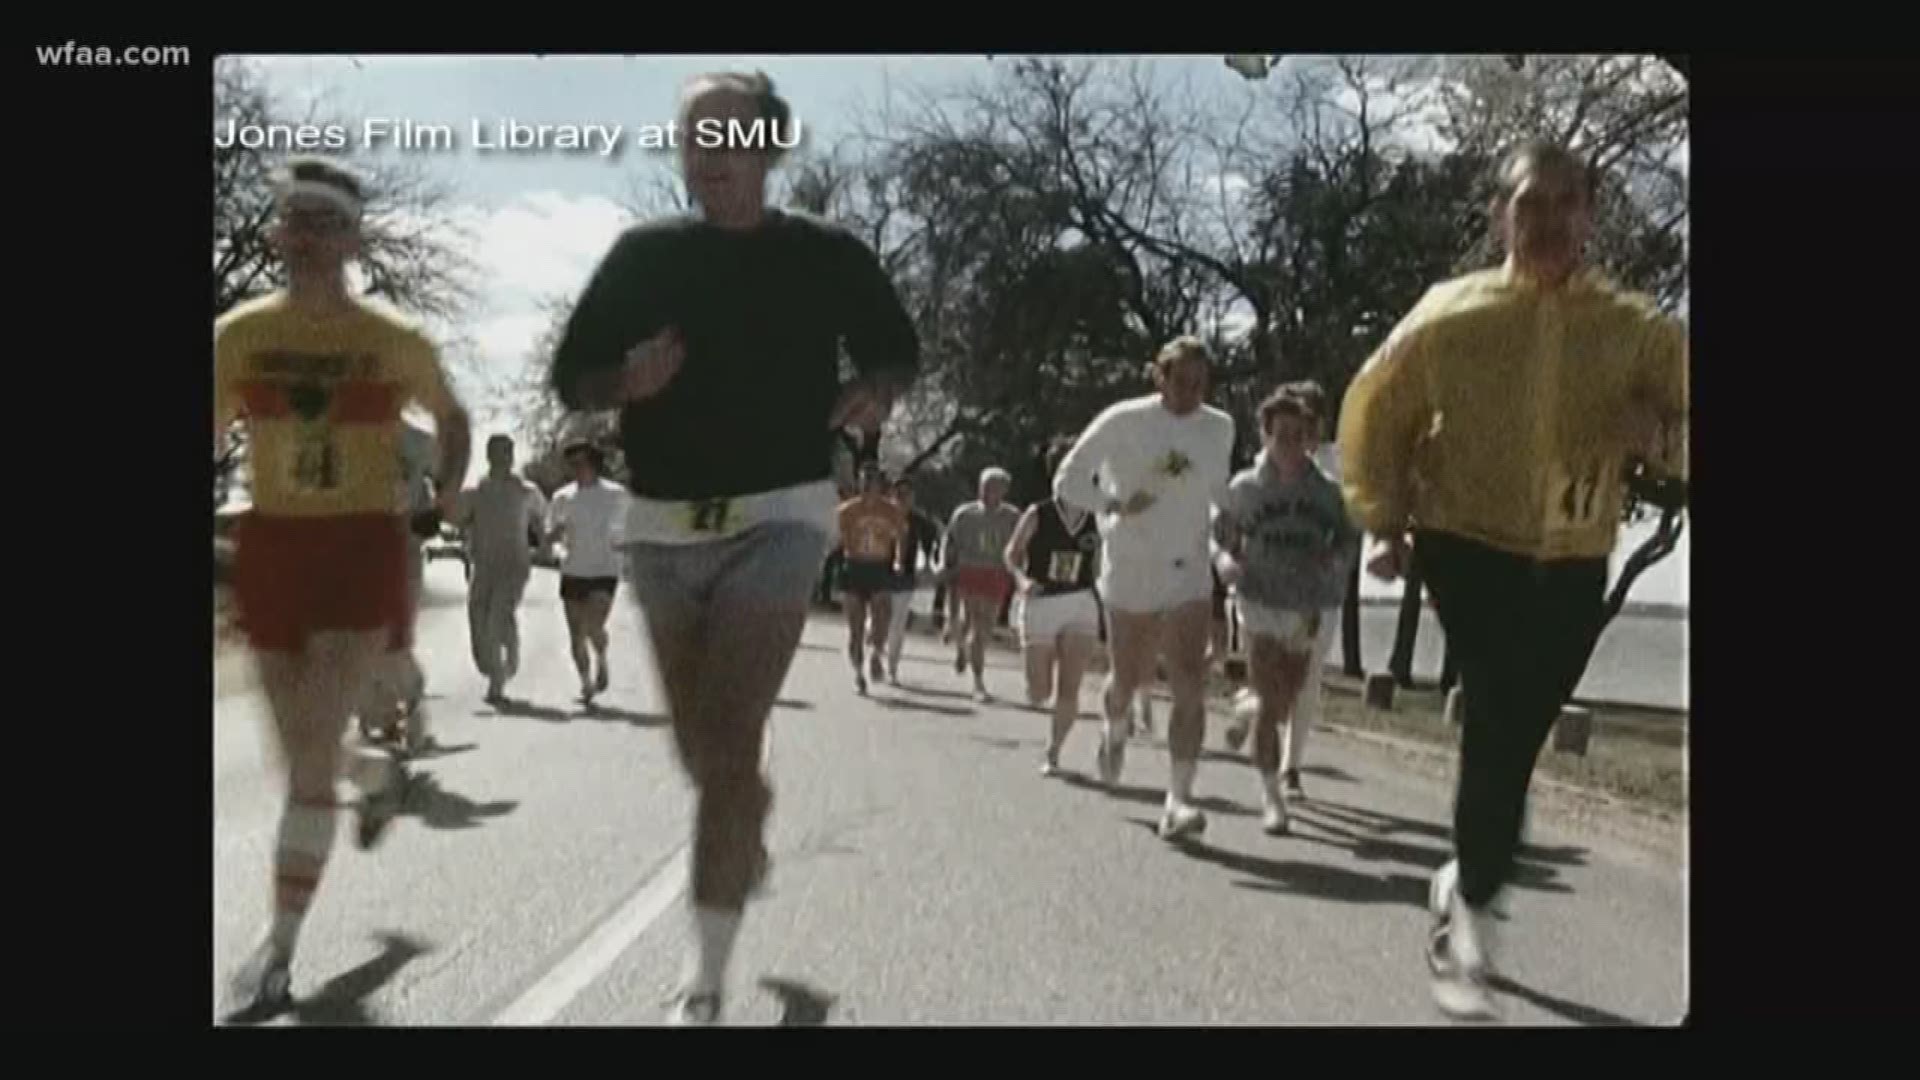 The marathon is the oldest one of its kind in Texas.